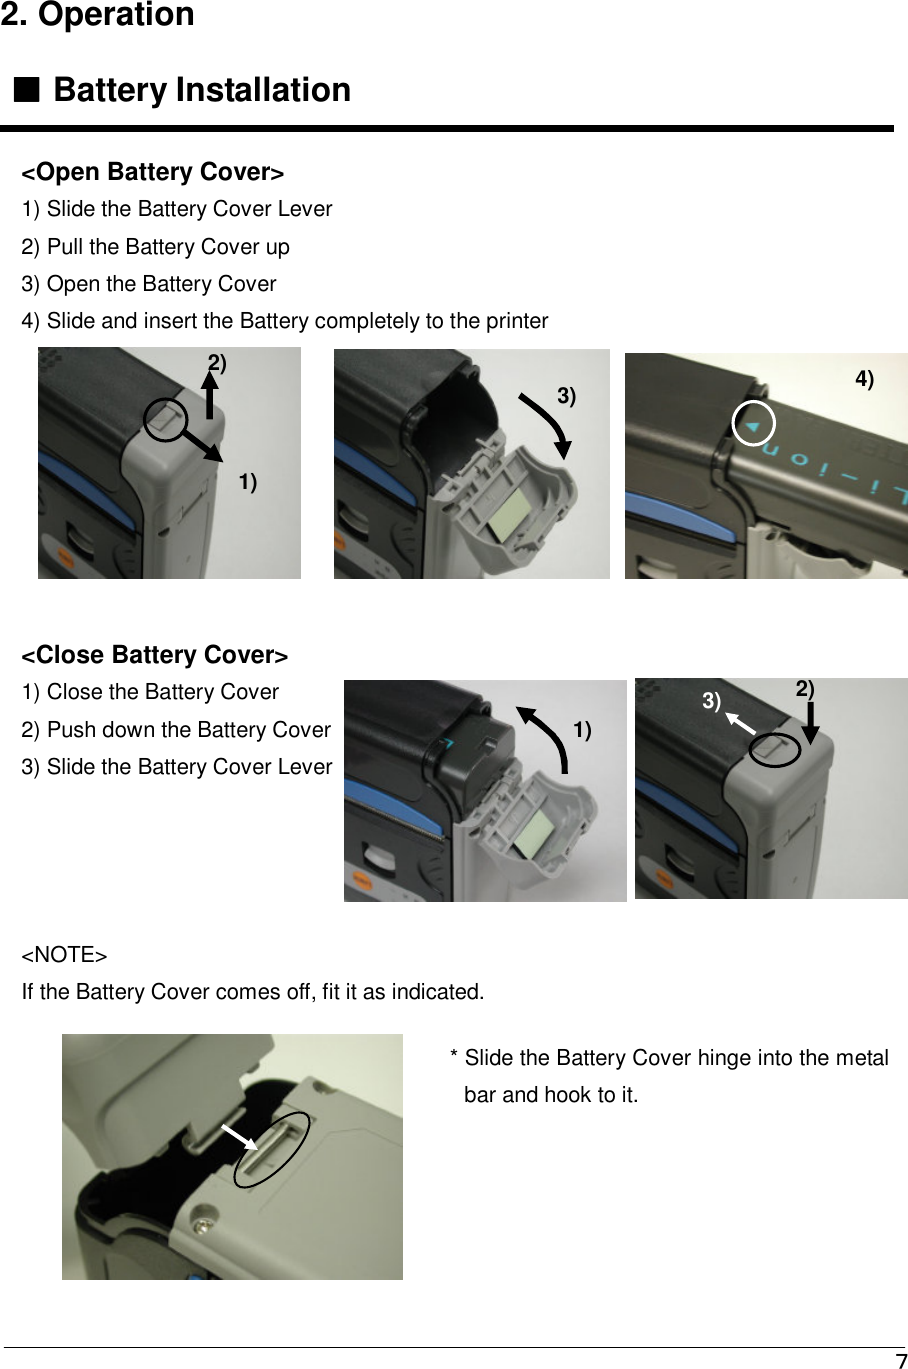   ７ 2. Operation  ■■■■ Battery Installation                                &lt;Close Battery Cover&gt; 1) Close the Battery Cover  2) Push down the Battery Cover 3) Slide the Battery Cover Lever &lt;NOTE&gt; If the Battery Cover comes off, fit it as indicated. * Slide the Battery Cover hinge into the metal bar and hook to it.   &lt;Open Battery Cover&gt; 1) Slide the Battery Cover Lever 2) Pull the Battery Cover up 3) Open the Battery Cover 4) Slide and insert the Battery completely to the printer 1) 2) 3) 4) 1) 2) 3) 